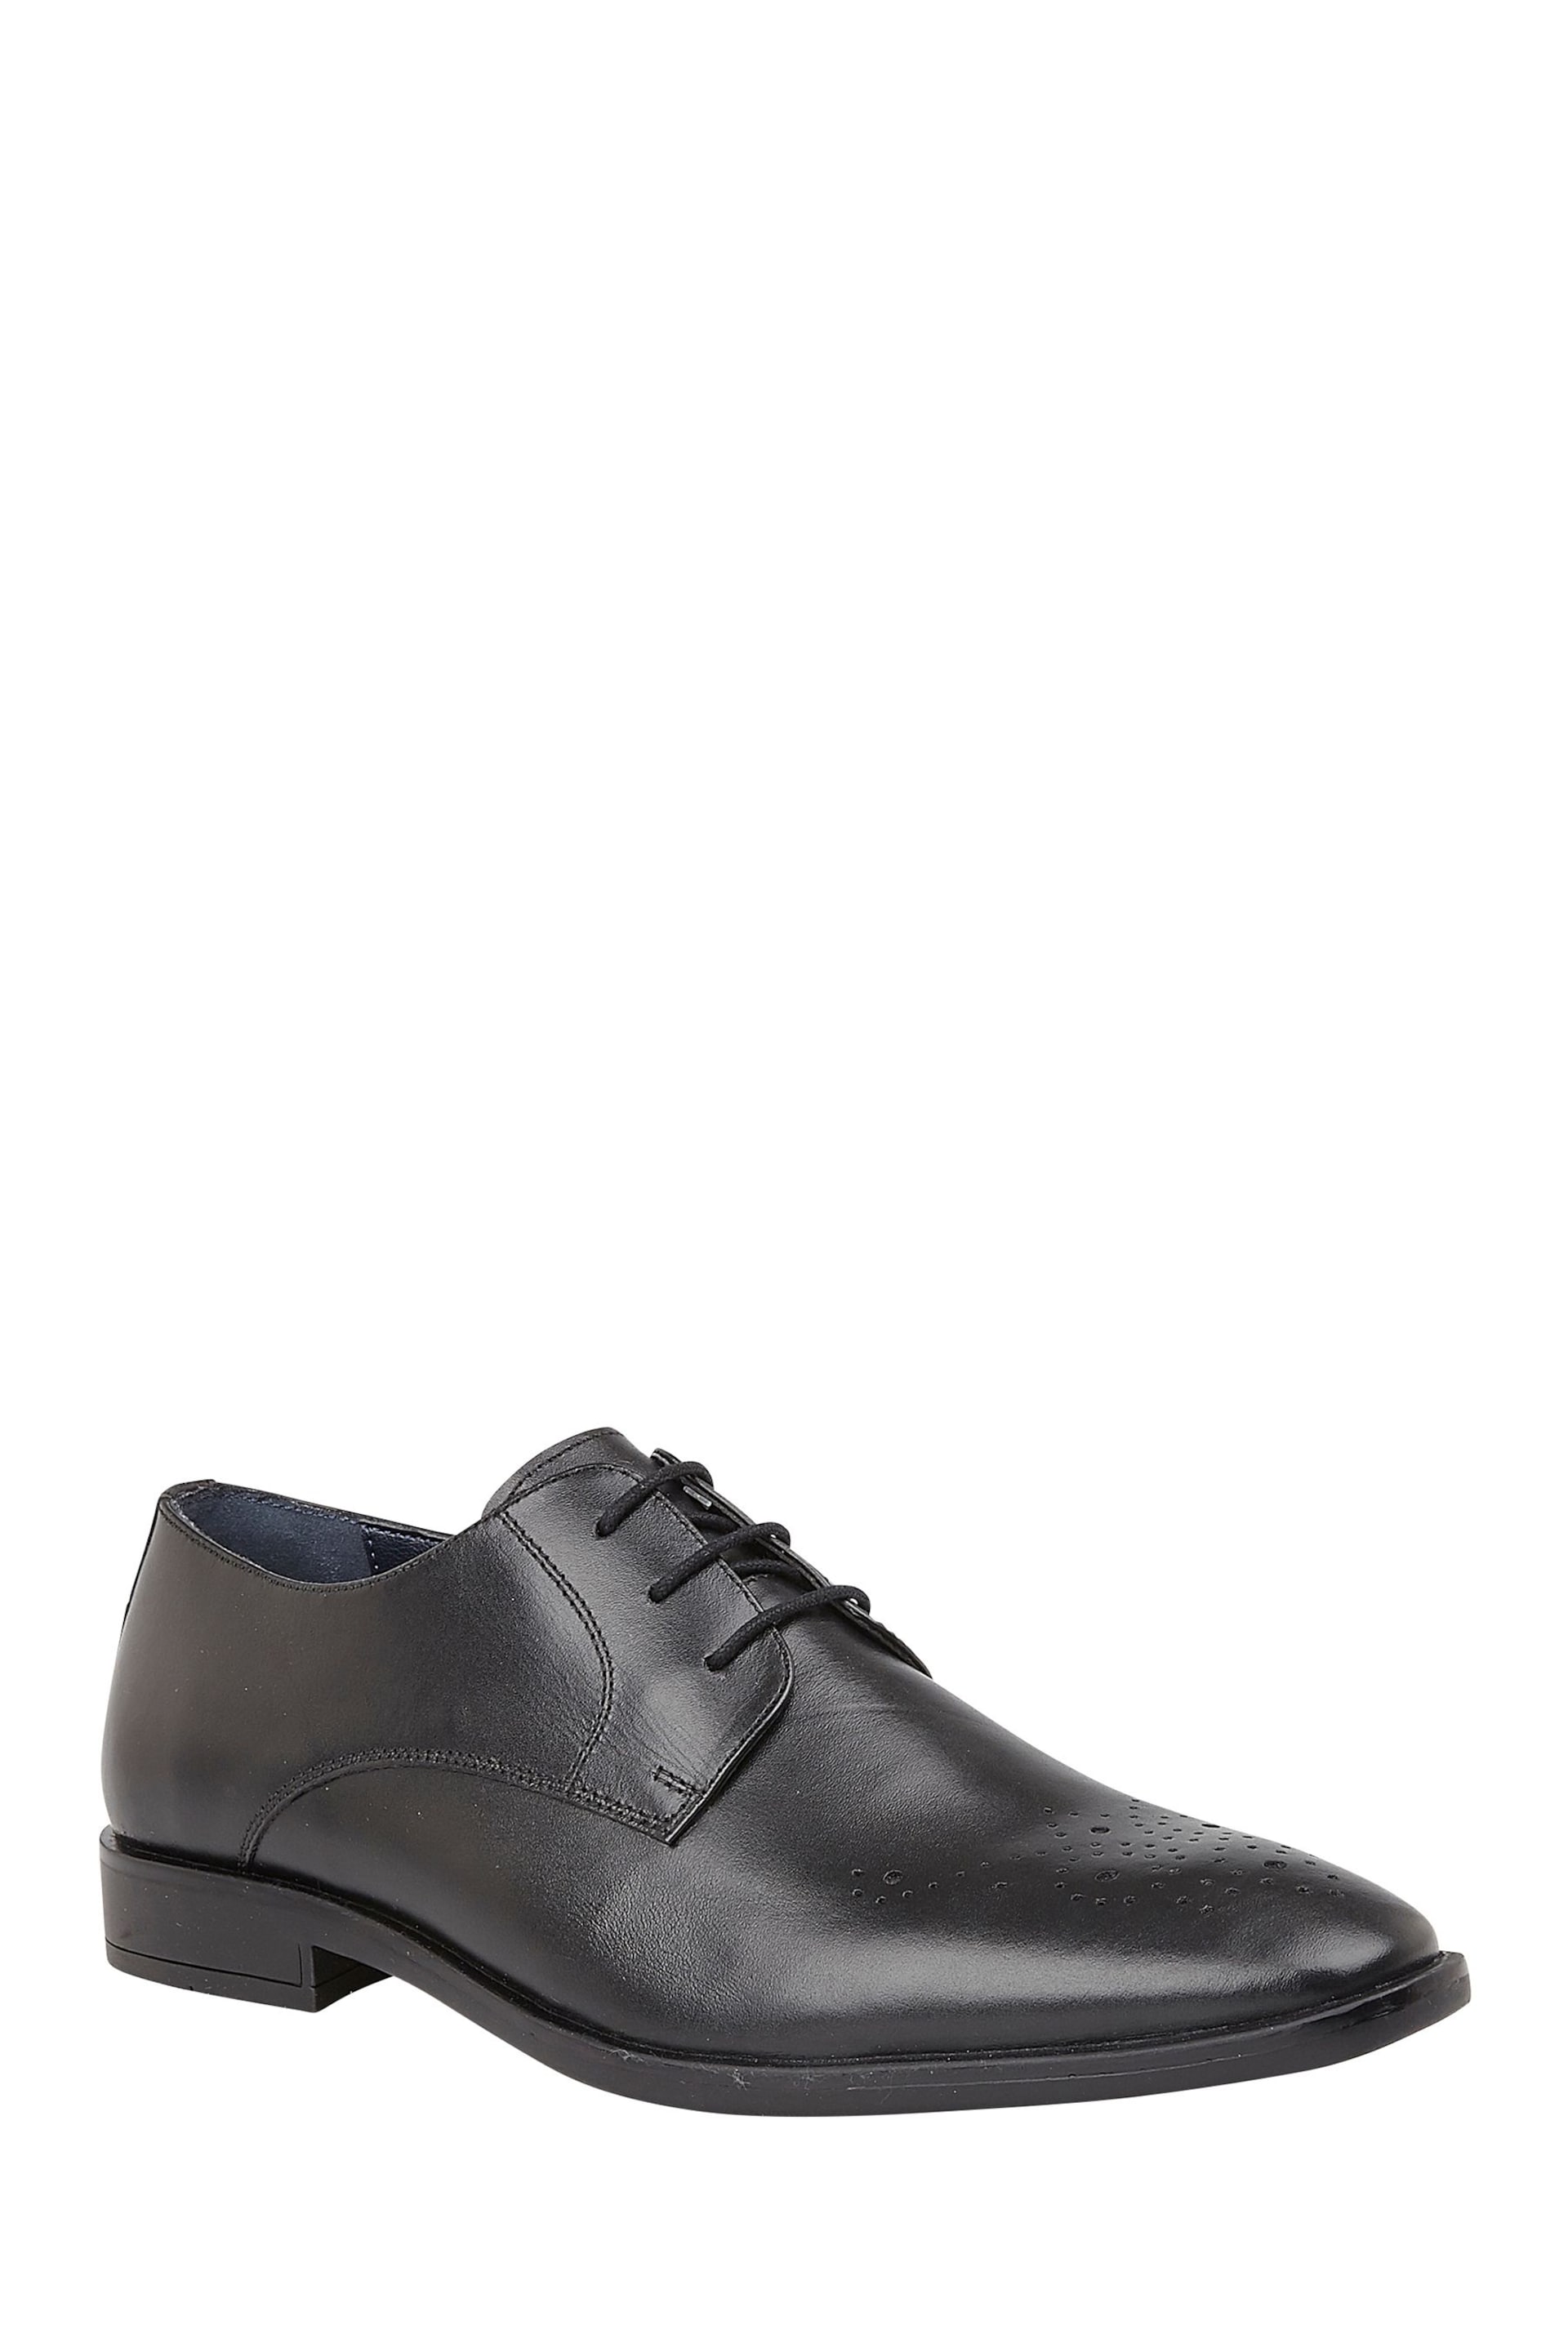 Lotus Black Olive Leather Derby Shoes - Image 1 of 4